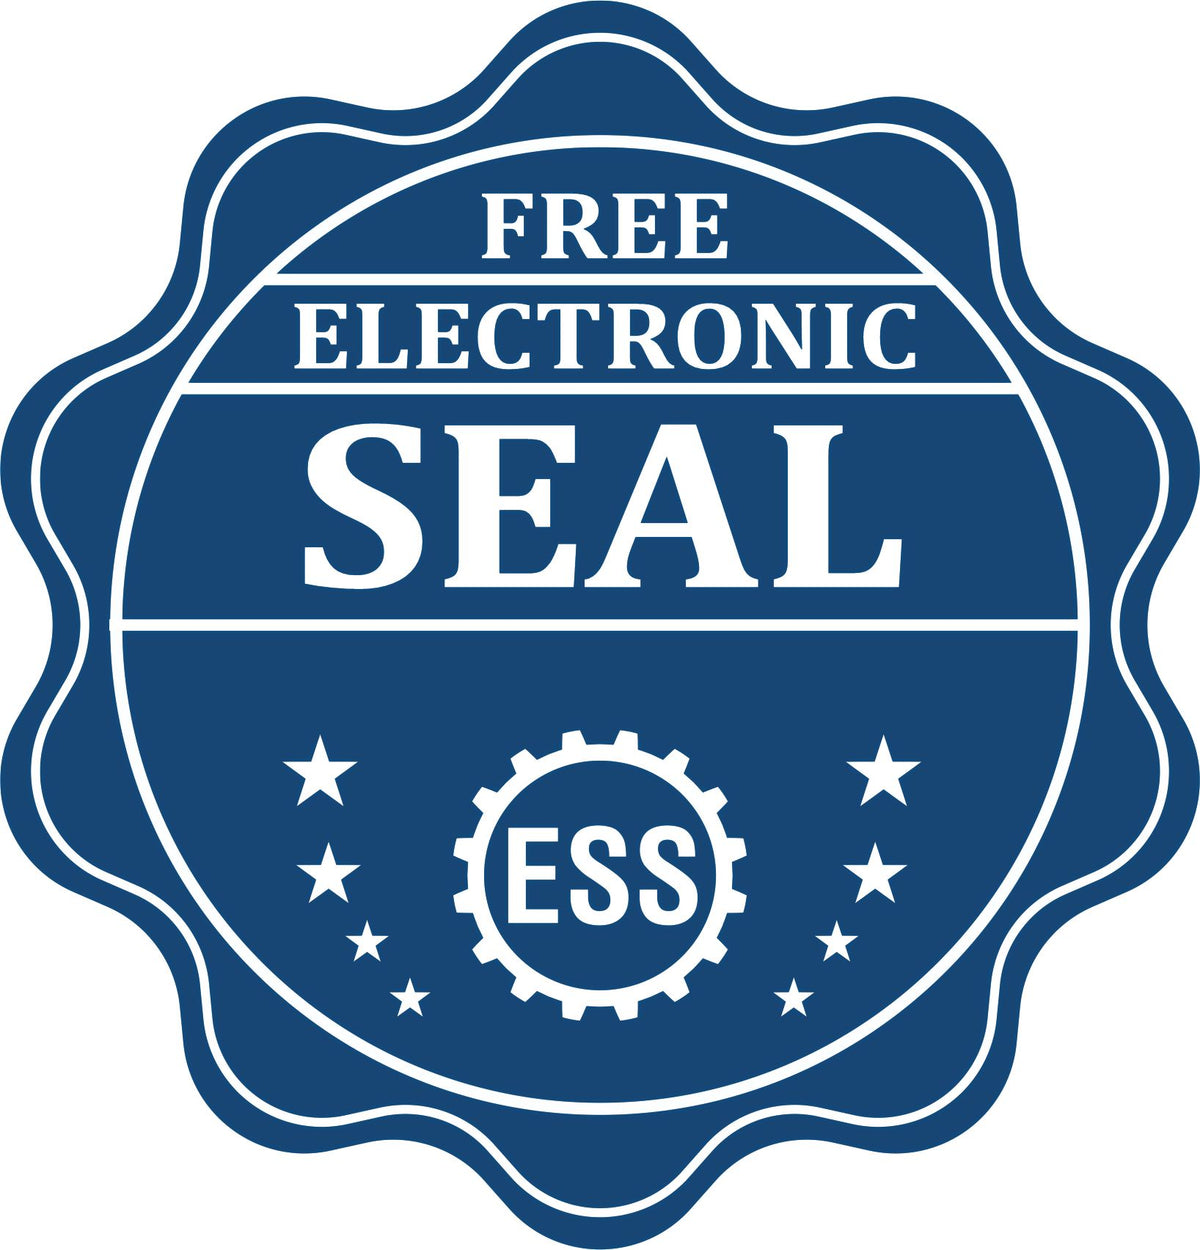 A badge showing a free electronic seal for the Heavy Duty Cast Iron Alaska Geologist Seal Embosser with stars and the ESS gear on the emblem.